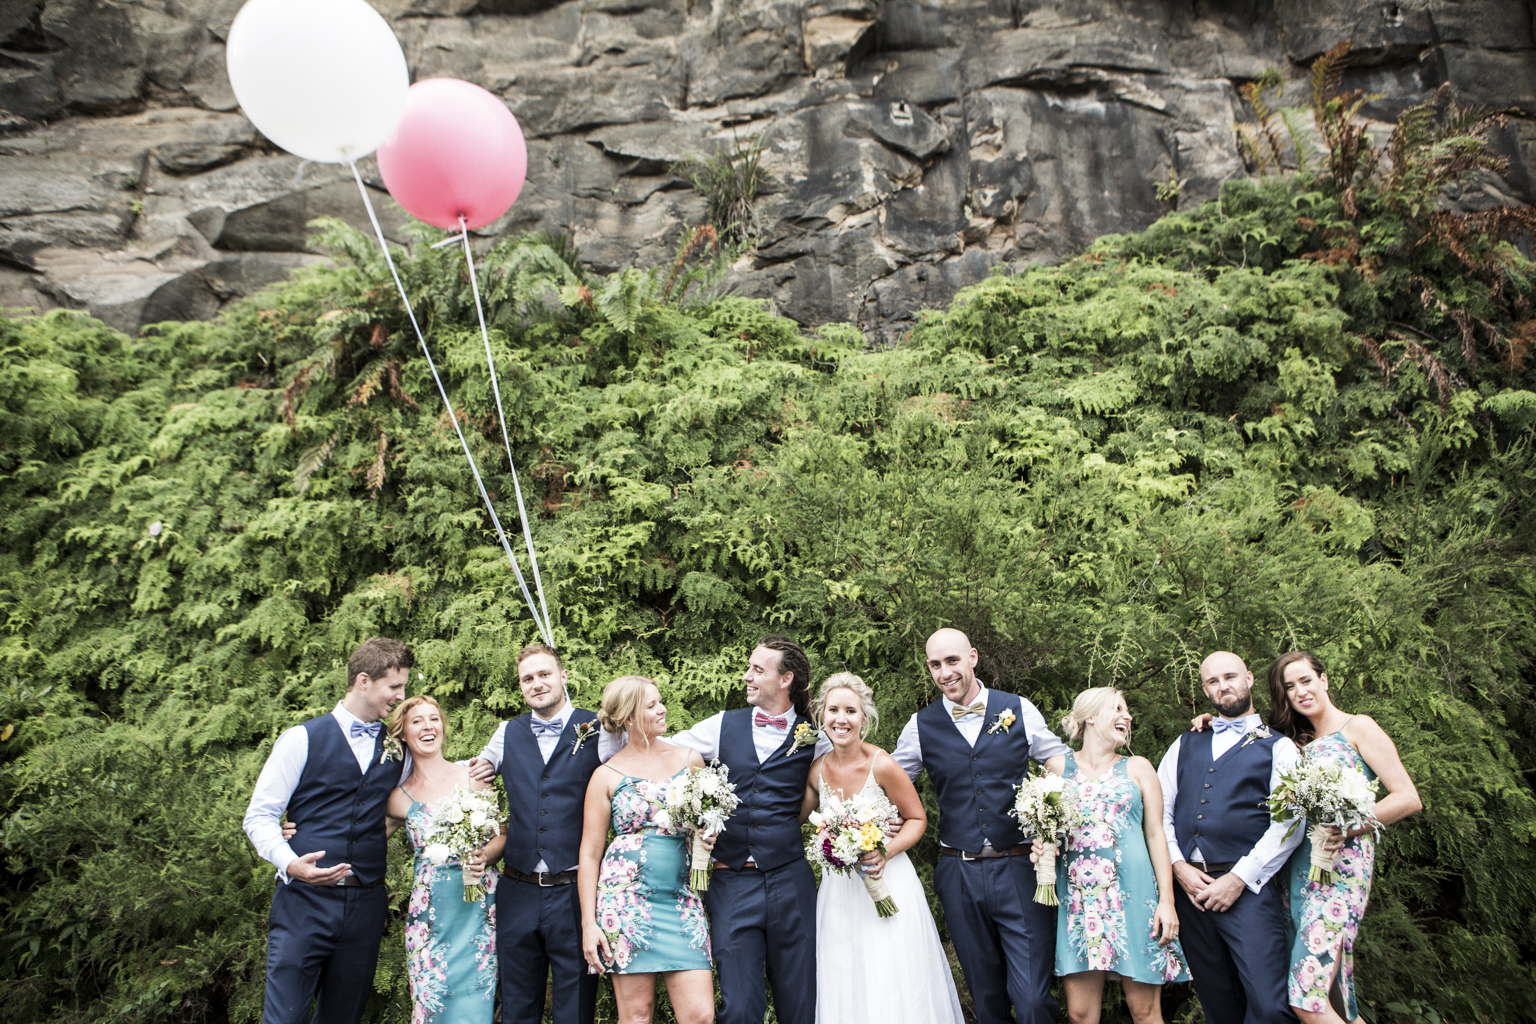 Bridal party having a laugh with giant pink and white balloons